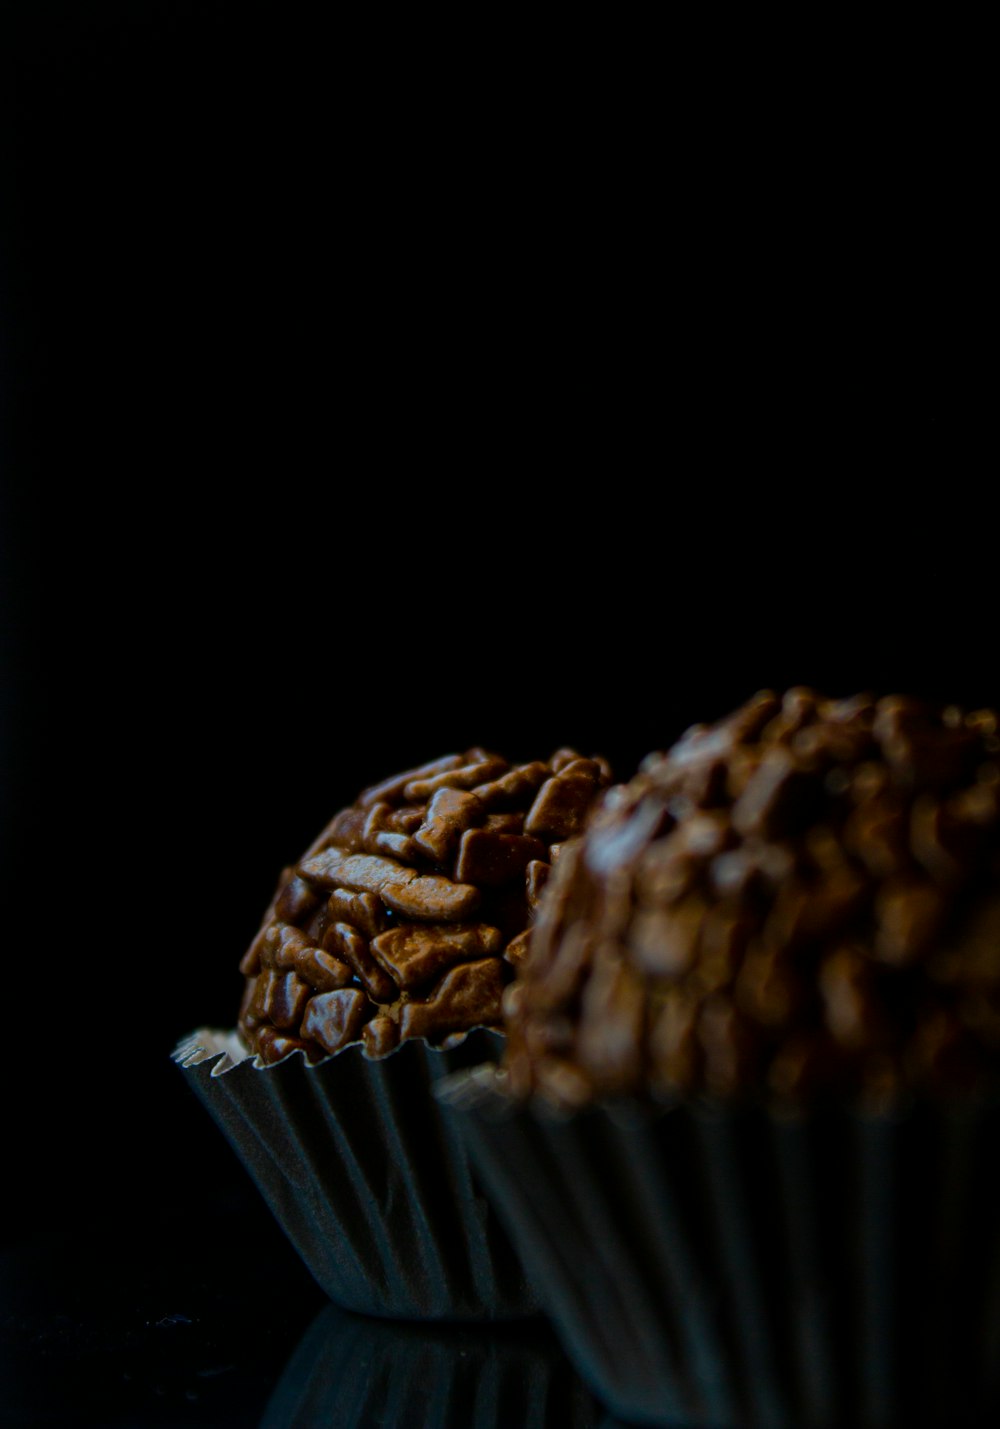 a close up of a muffin on a table